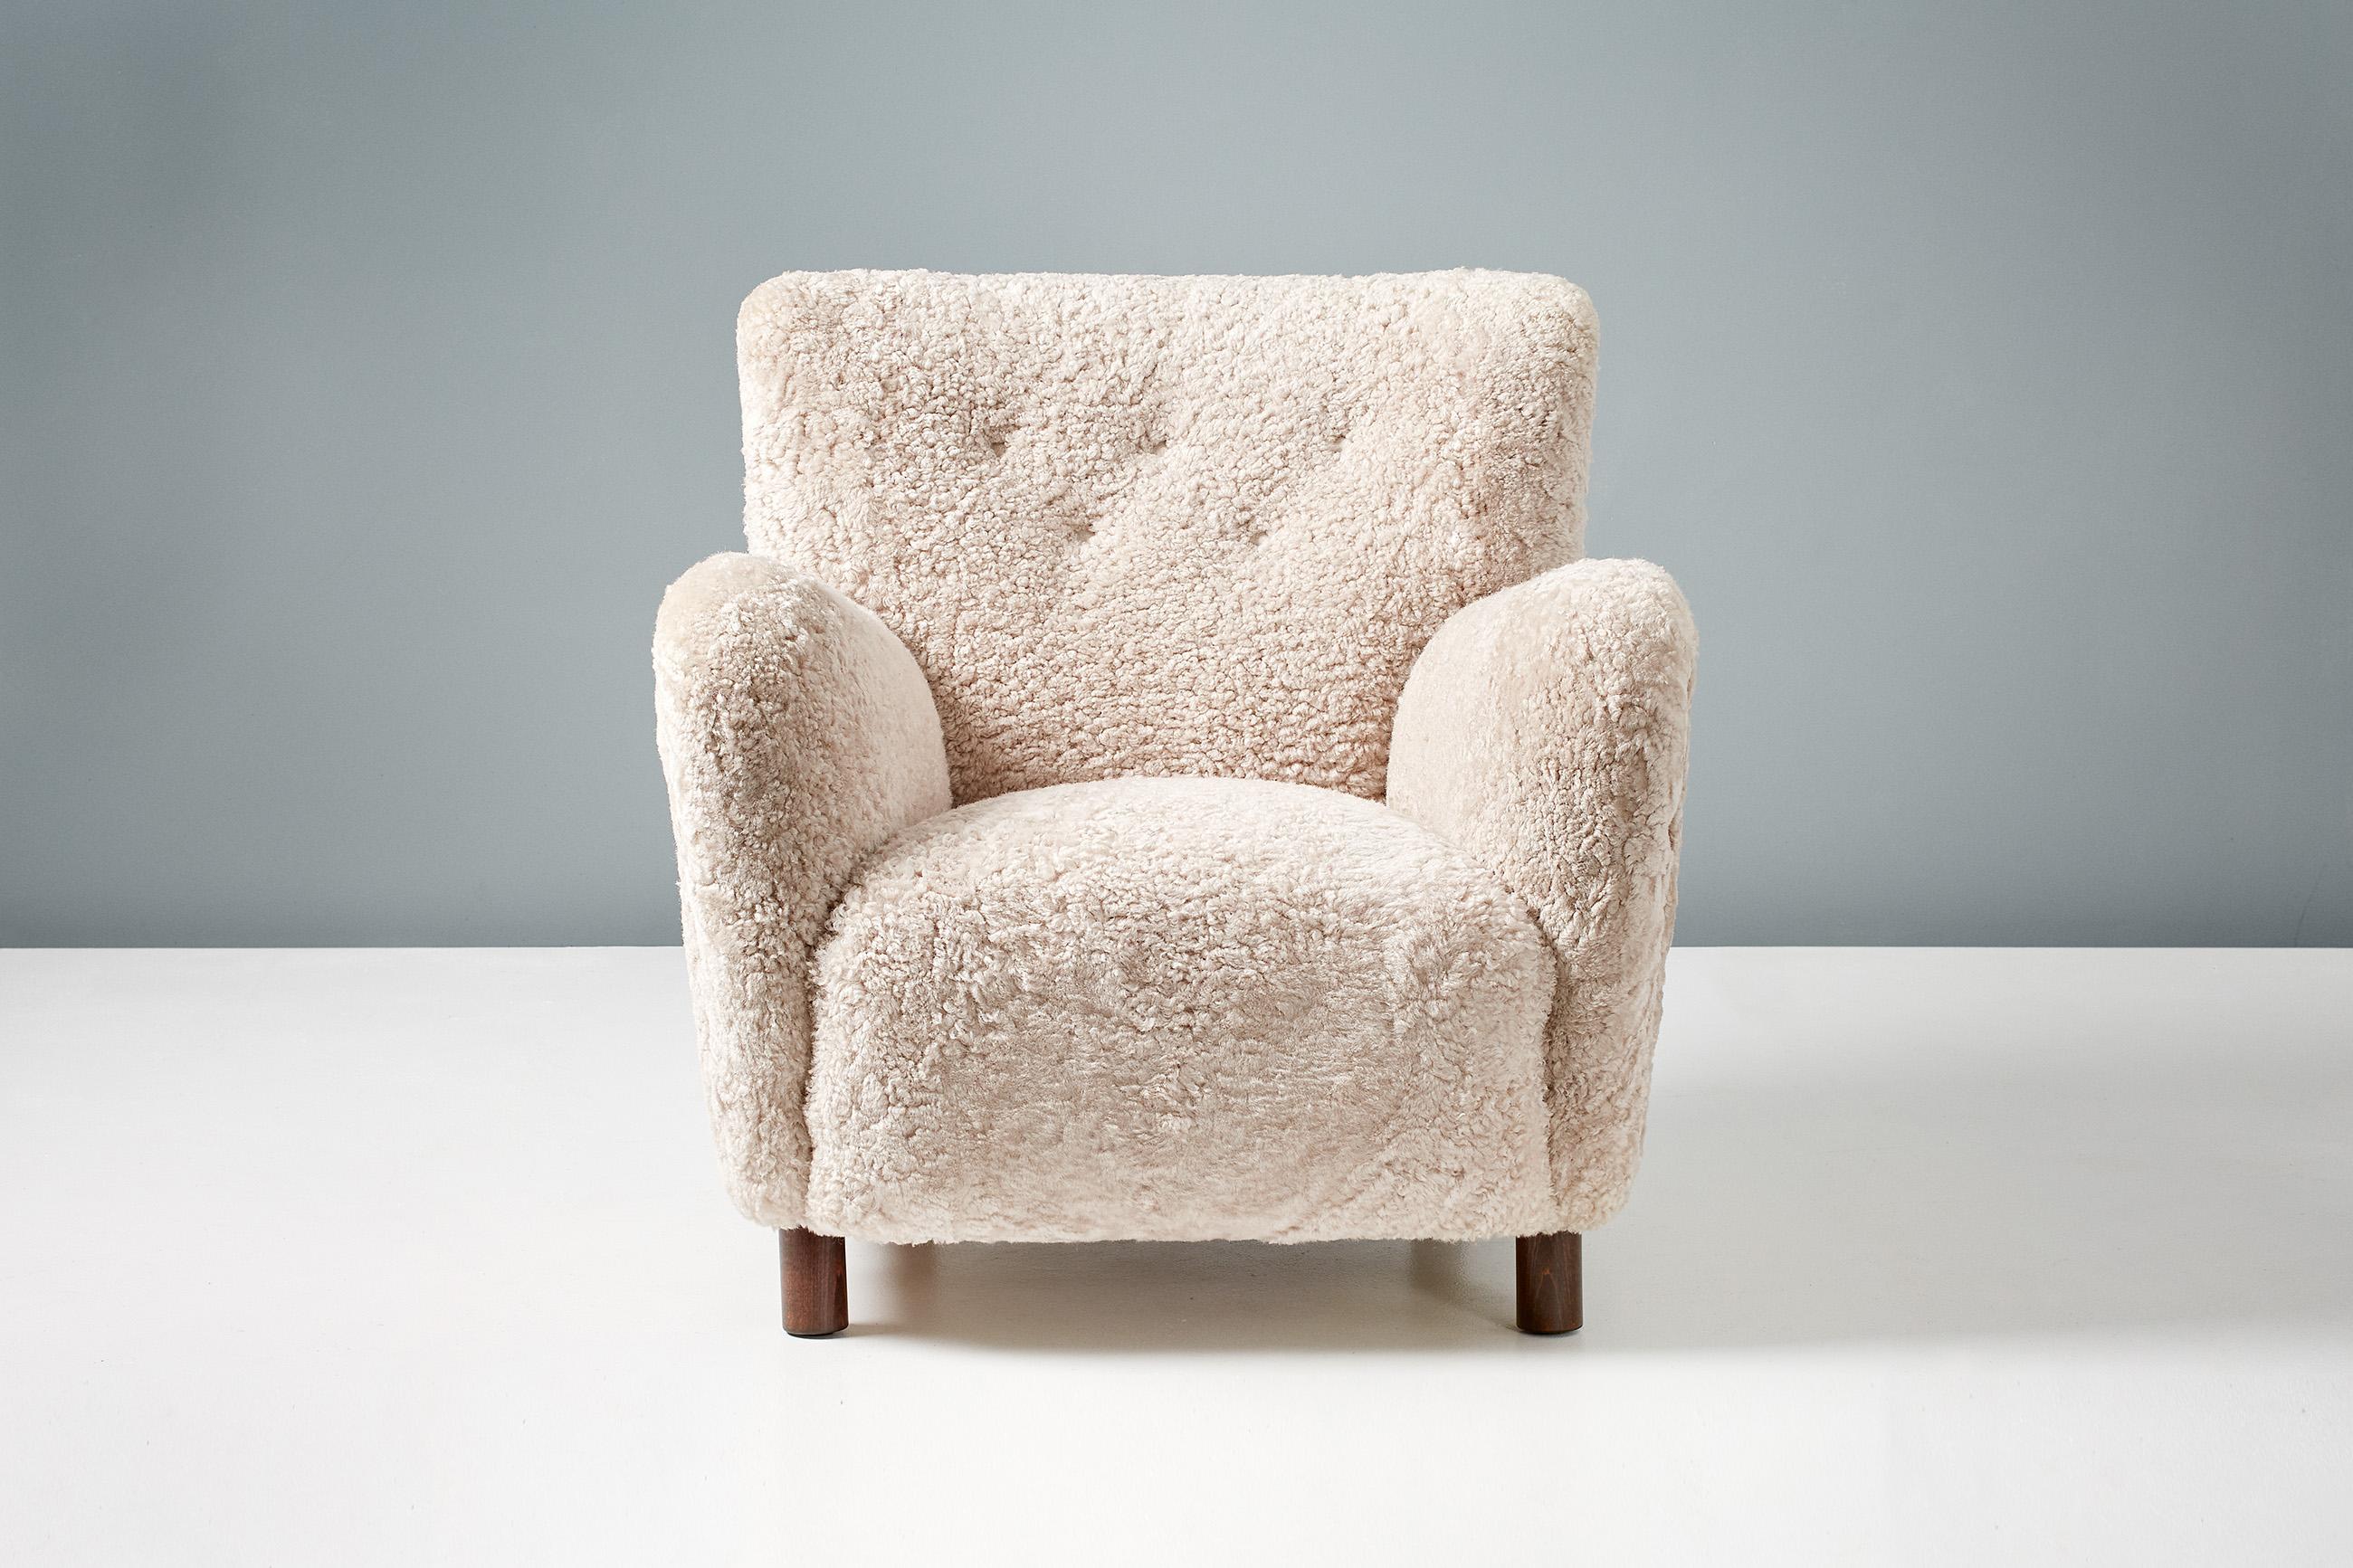 Dagmar design

Model 54 lounge chair

A pair of custom made lounge chairs developed and produced at our workshops in London using the highest quality materials. The 54 chair is available to order in a range of different shearling colors and fabrics.